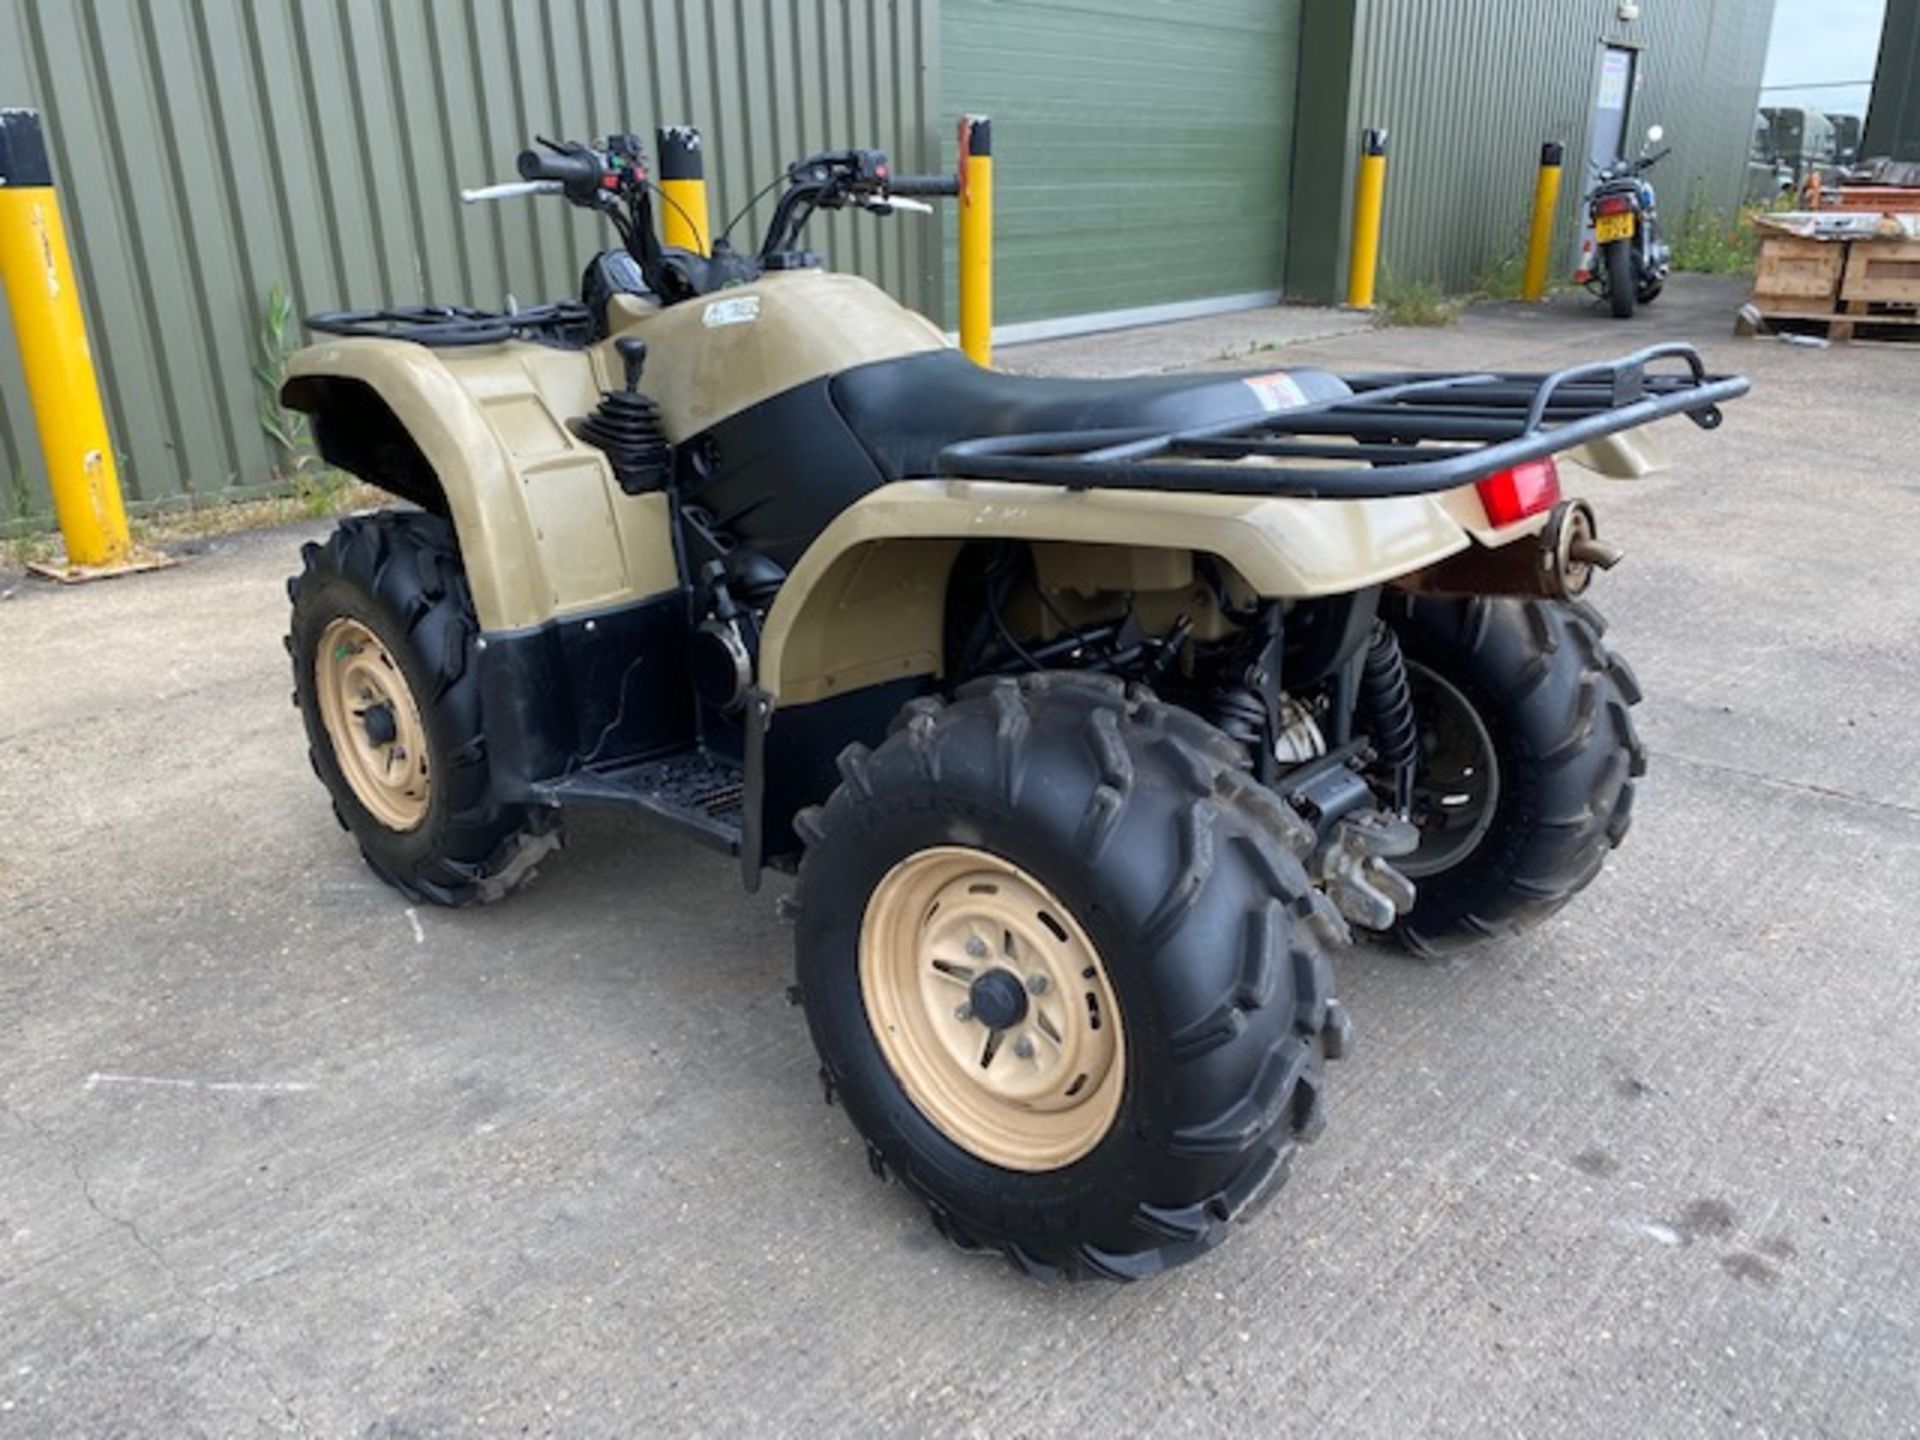 Military Specification Yamaha Grizzly 450 4 x 4 ATV Quad Bike ONLY 5,539Km!!! - Image 7 of 26